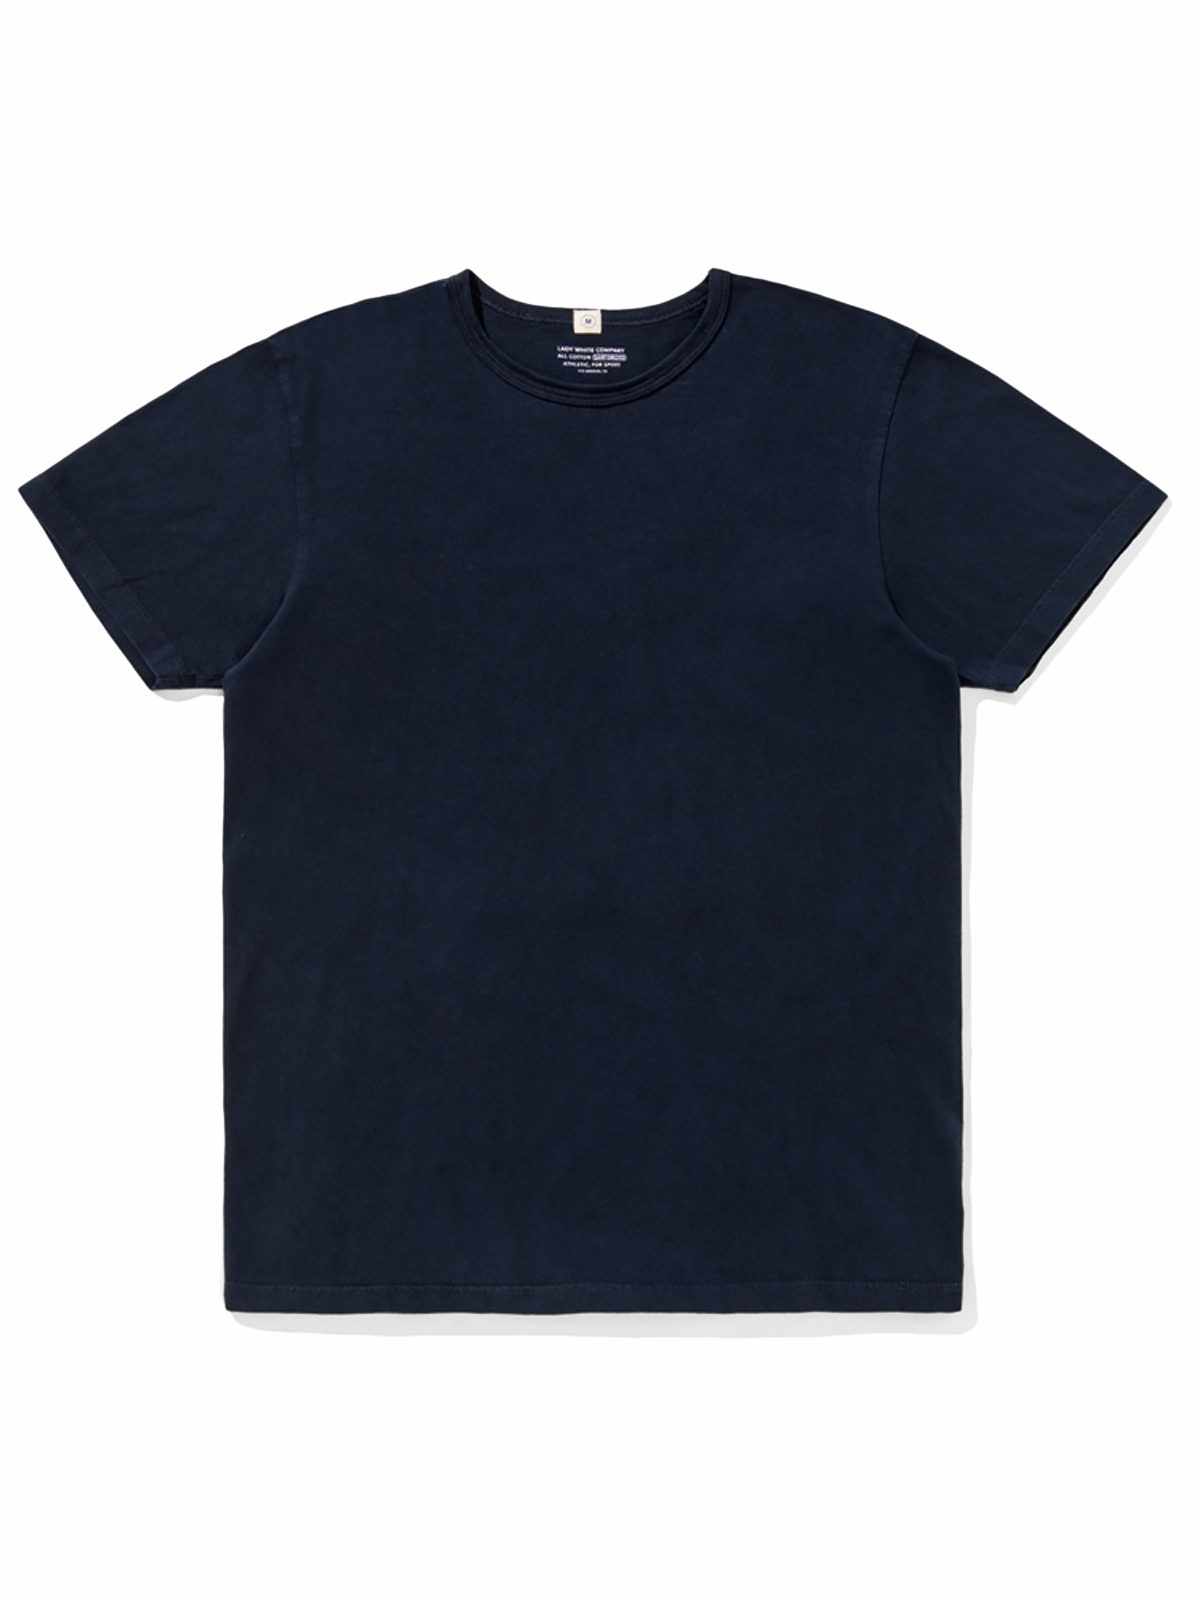 Lady White Co. Our White T-Shirt Navy - MORE by Morello Indonesia